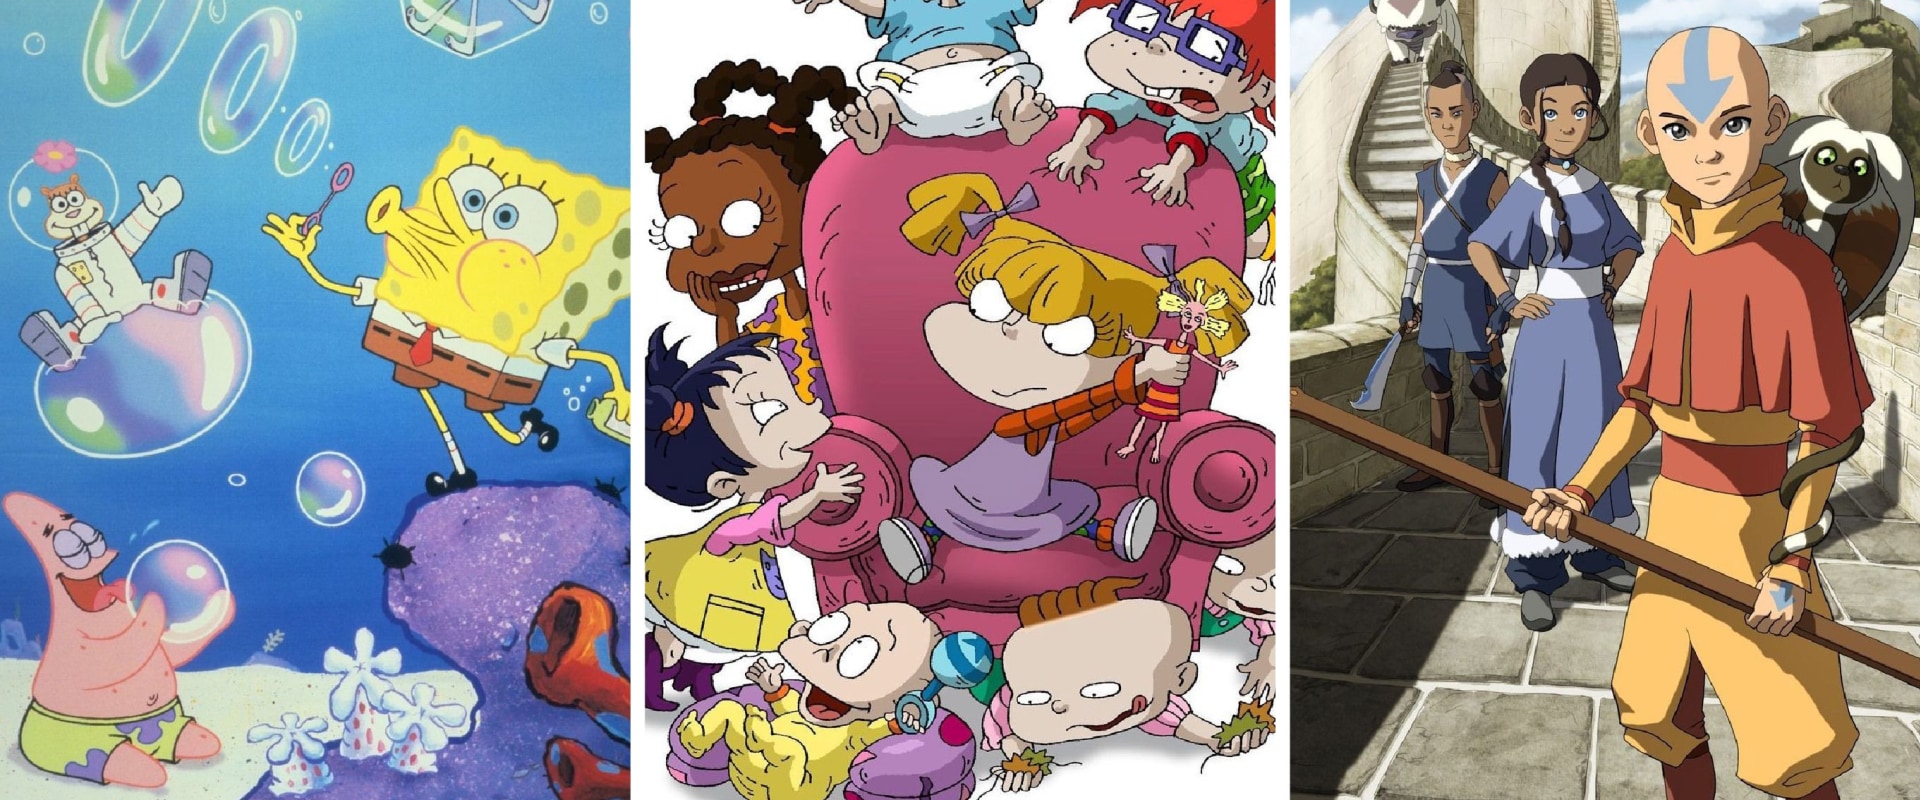 The Top 5 Most Popular Cartoons of All Time